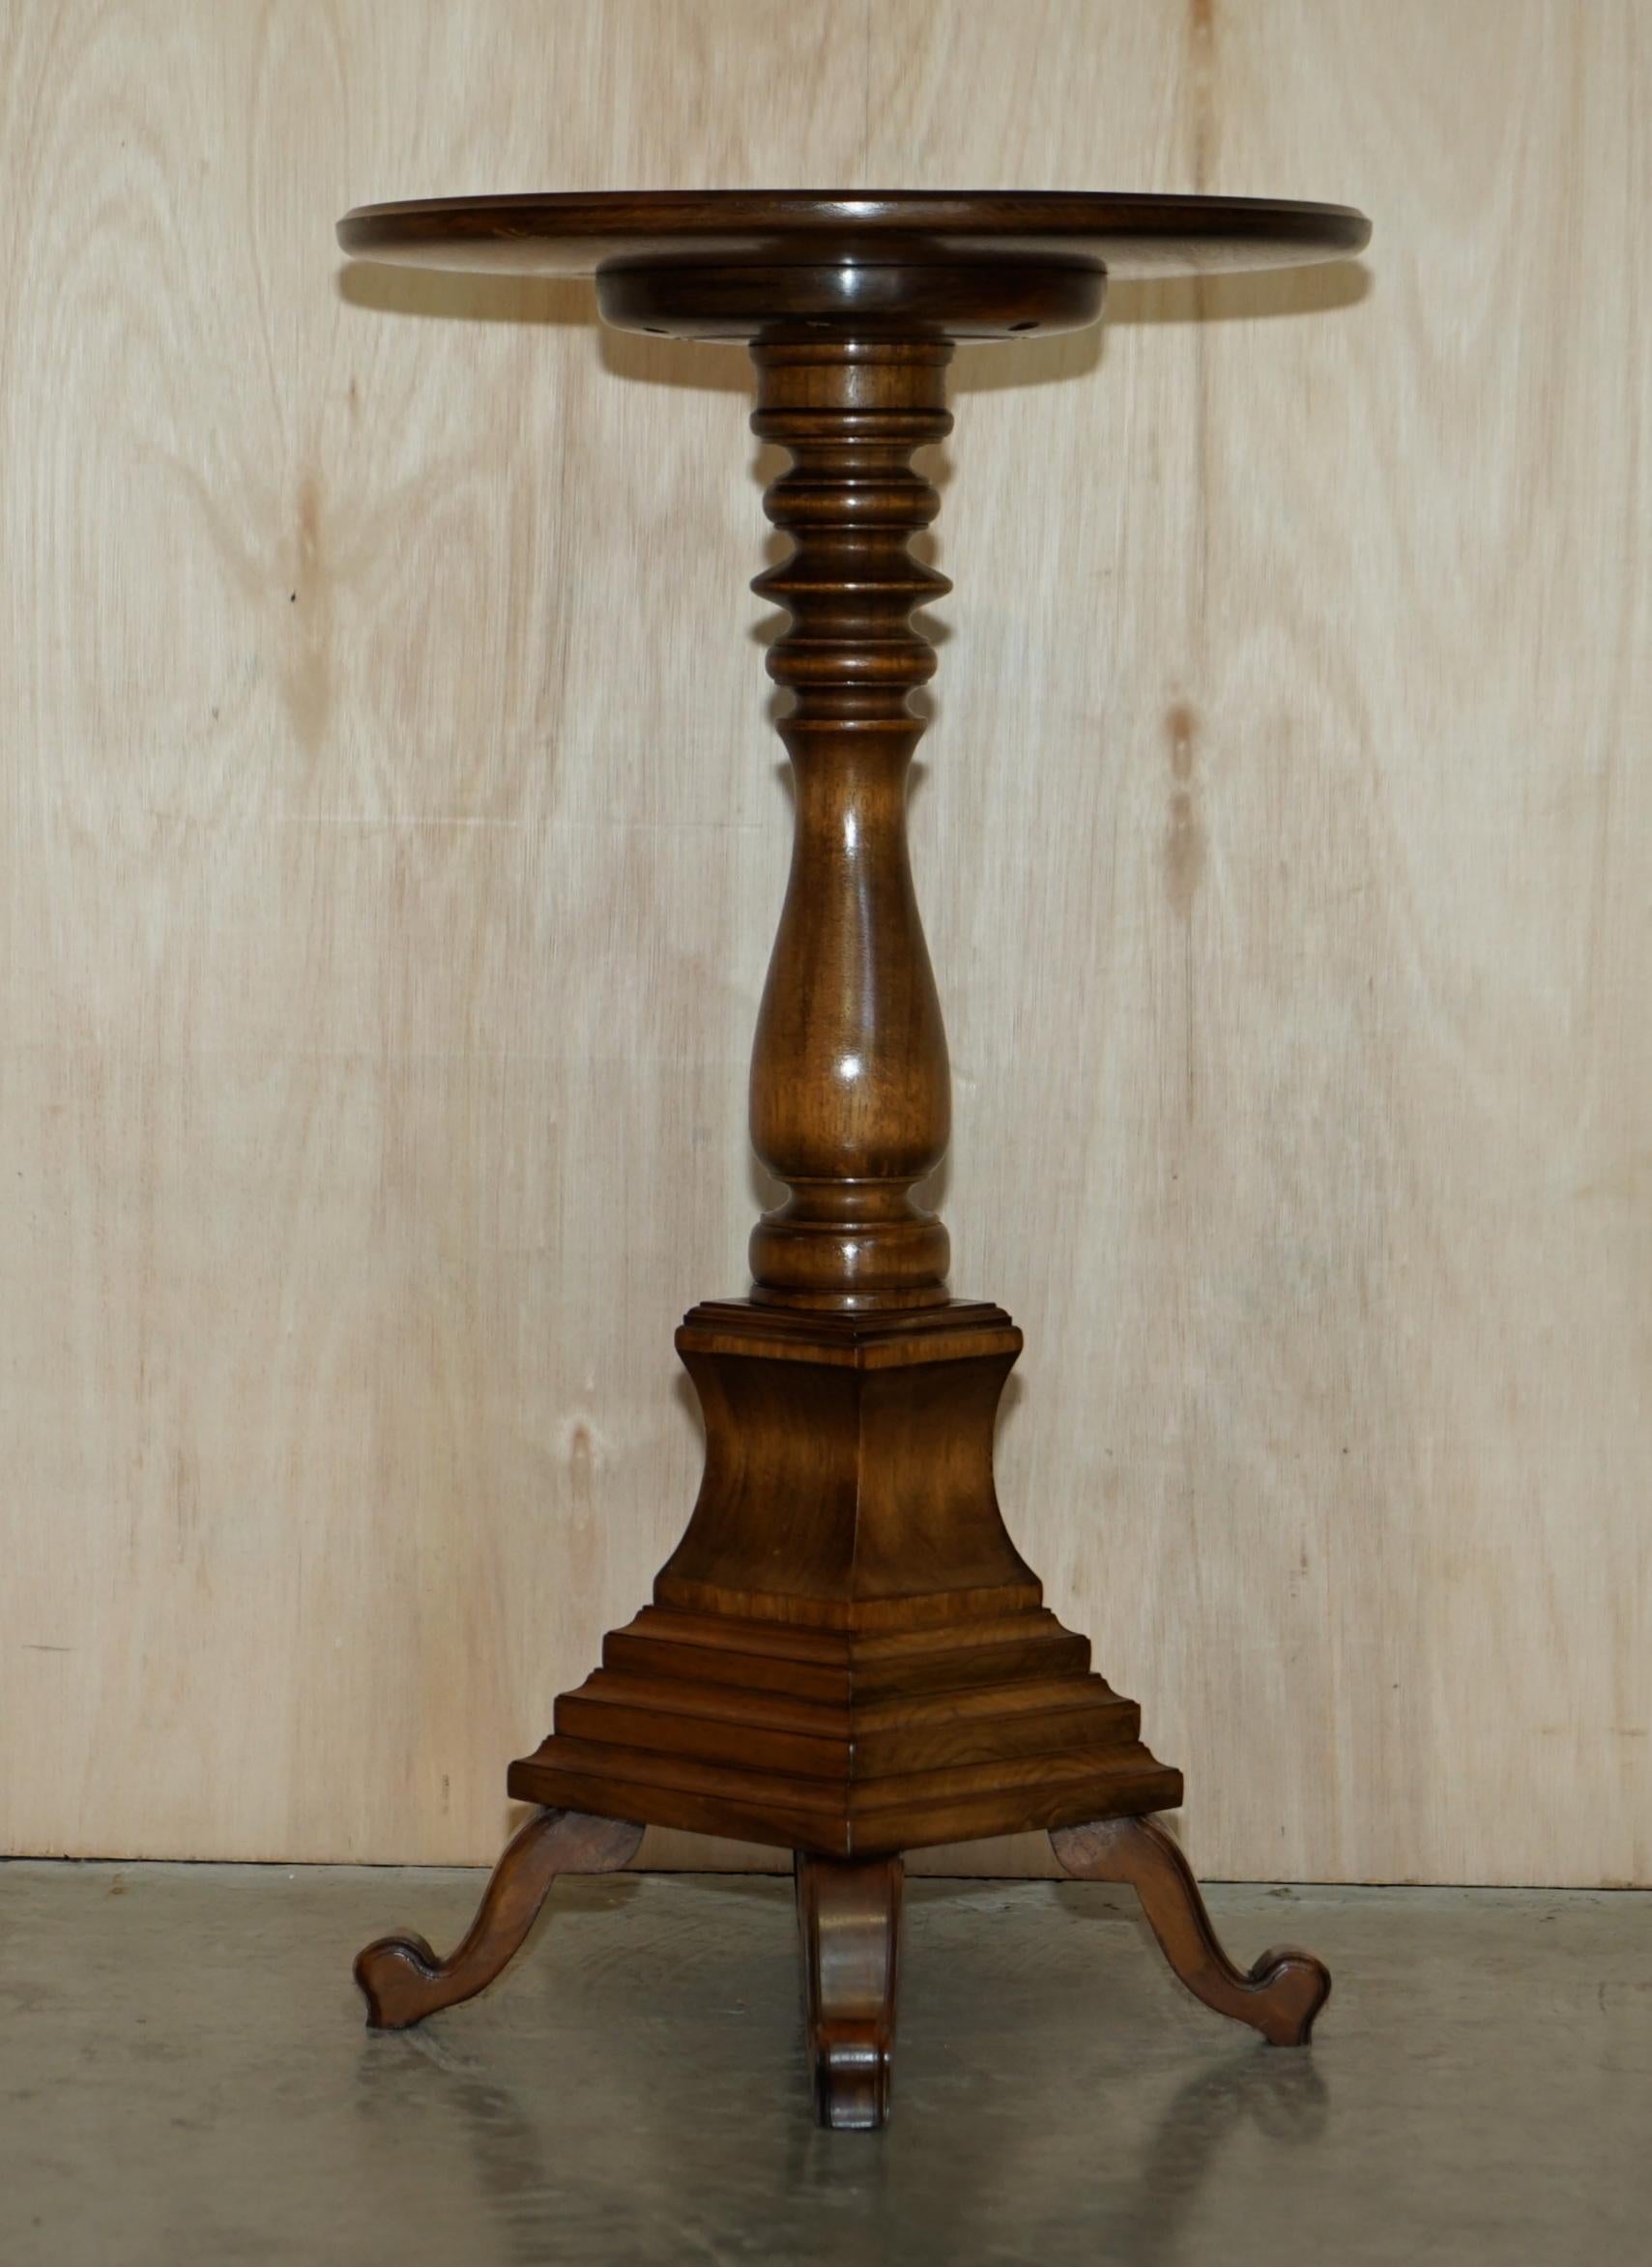 We are delighted to offer for sale this lovely hand made in England by JB Wright signed and stamped English Regency Revival side table

A good looking, stylish and well made piece, ideally suited for a lamp or glass of wine, it’s a very good size